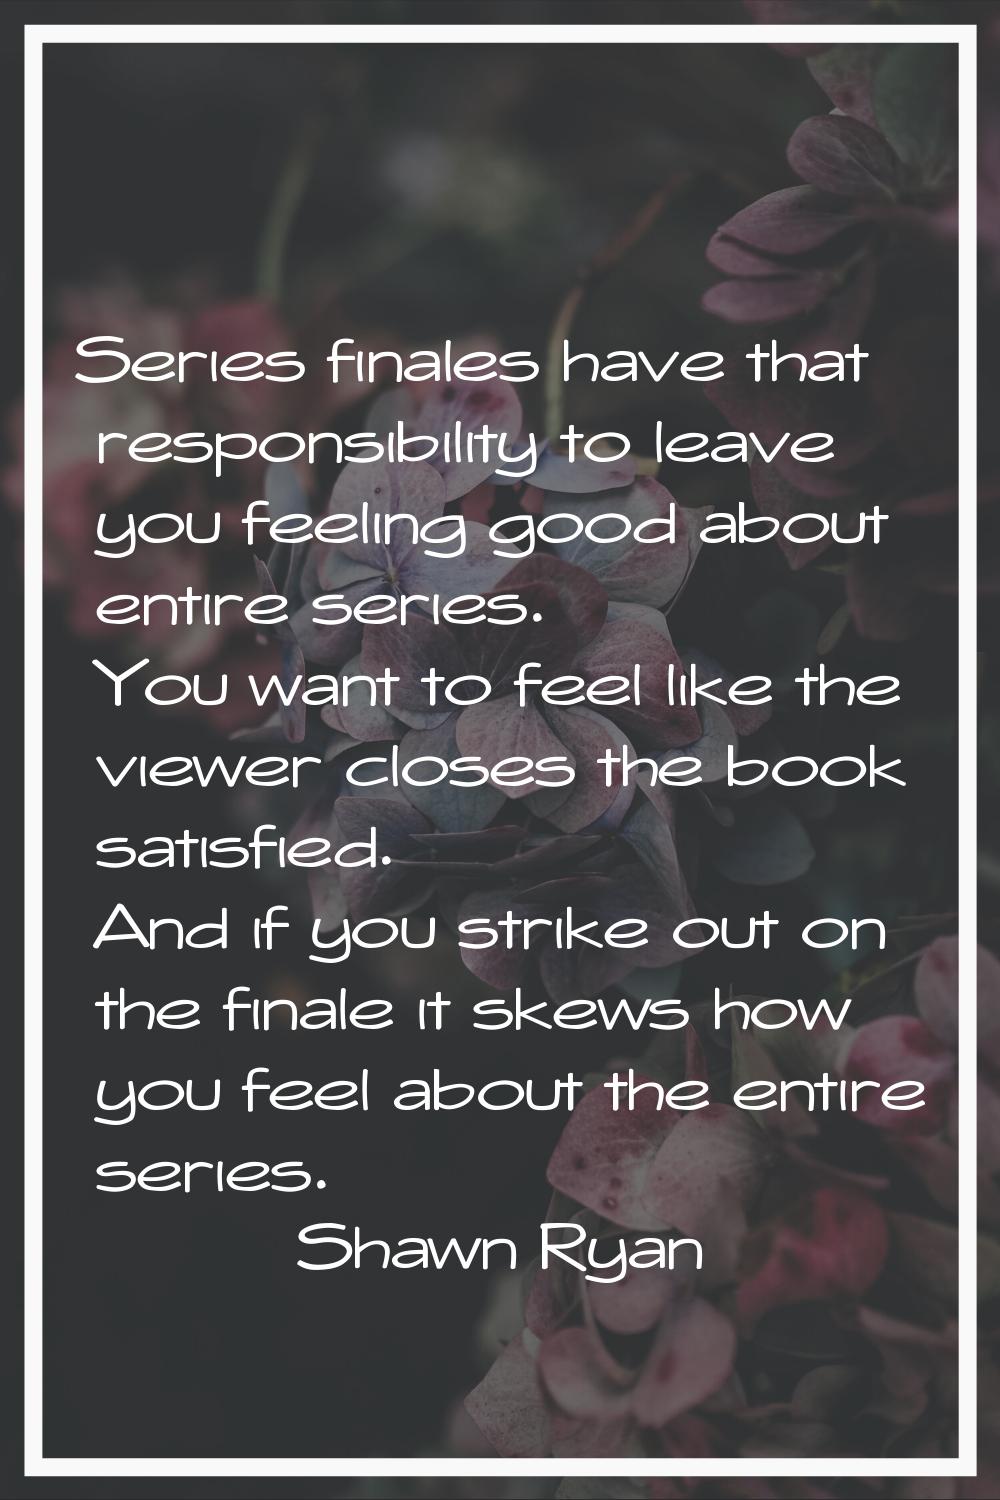 Series finales have that responsibility to leave you feeling good about entire series. You want to 